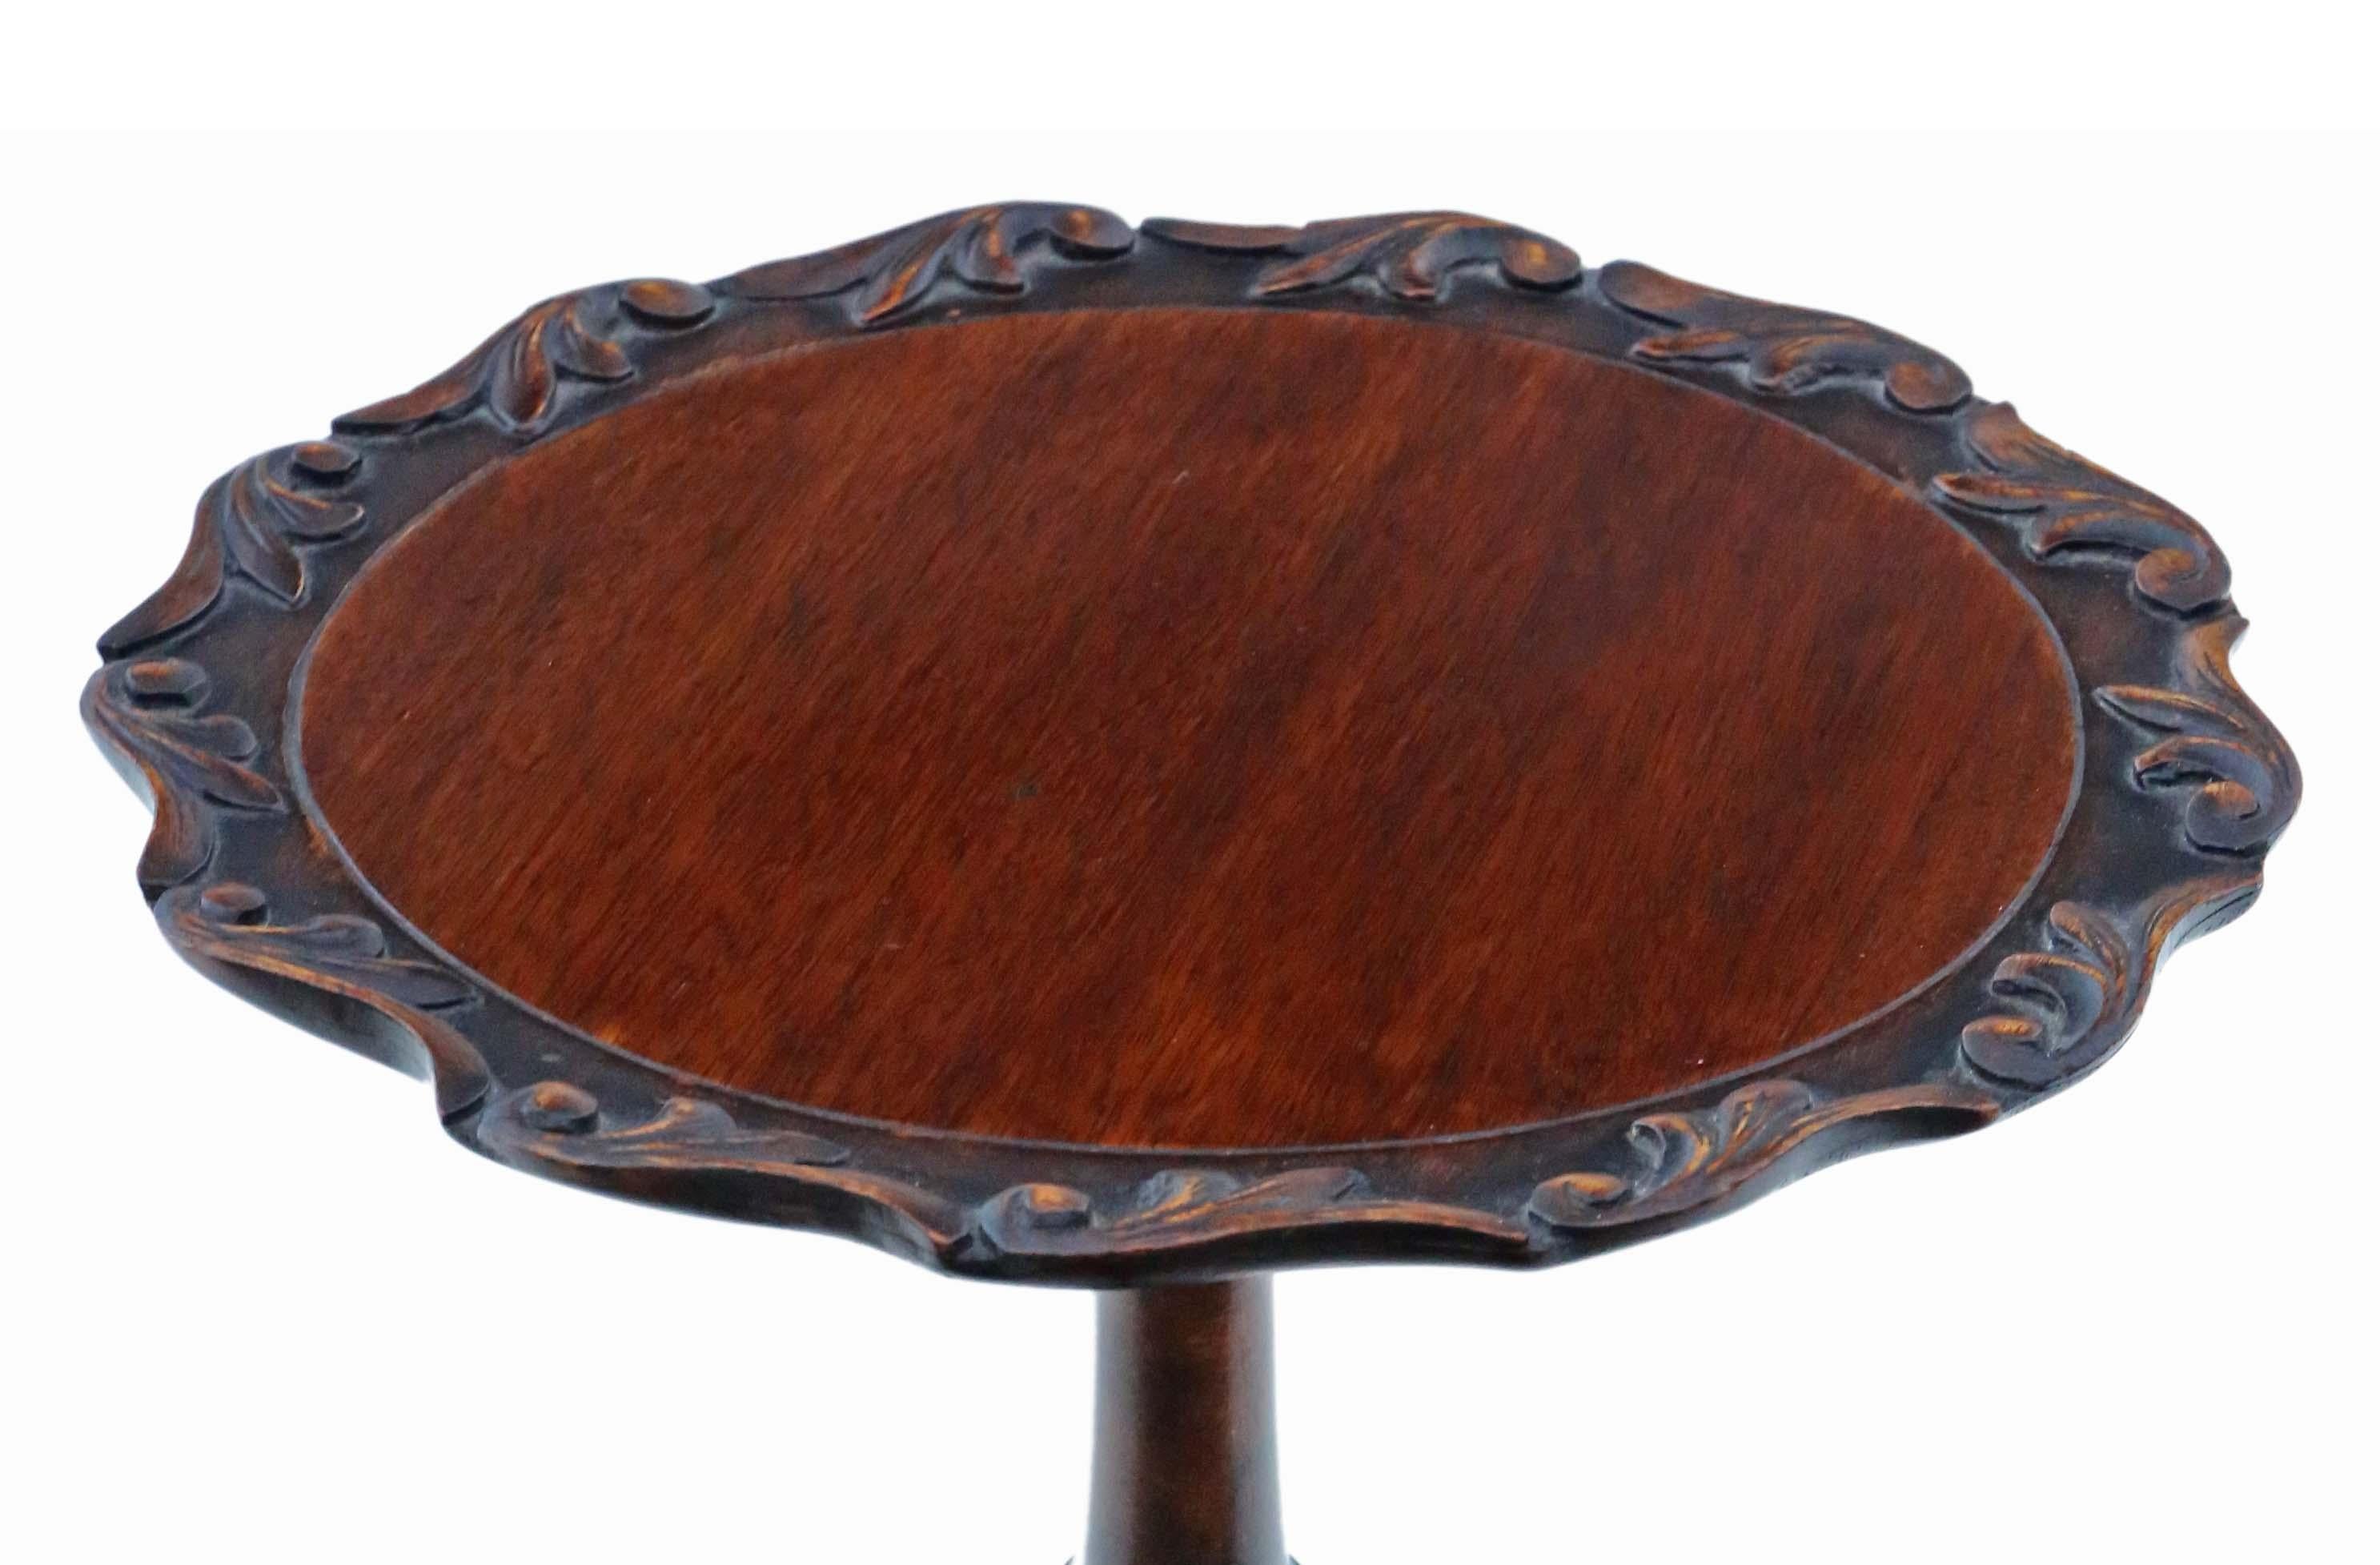 Antique fine quality Georgian revival wine or side table C1910 mahogany In Good Condition For Sale In Wisbech, Cambridgeshire